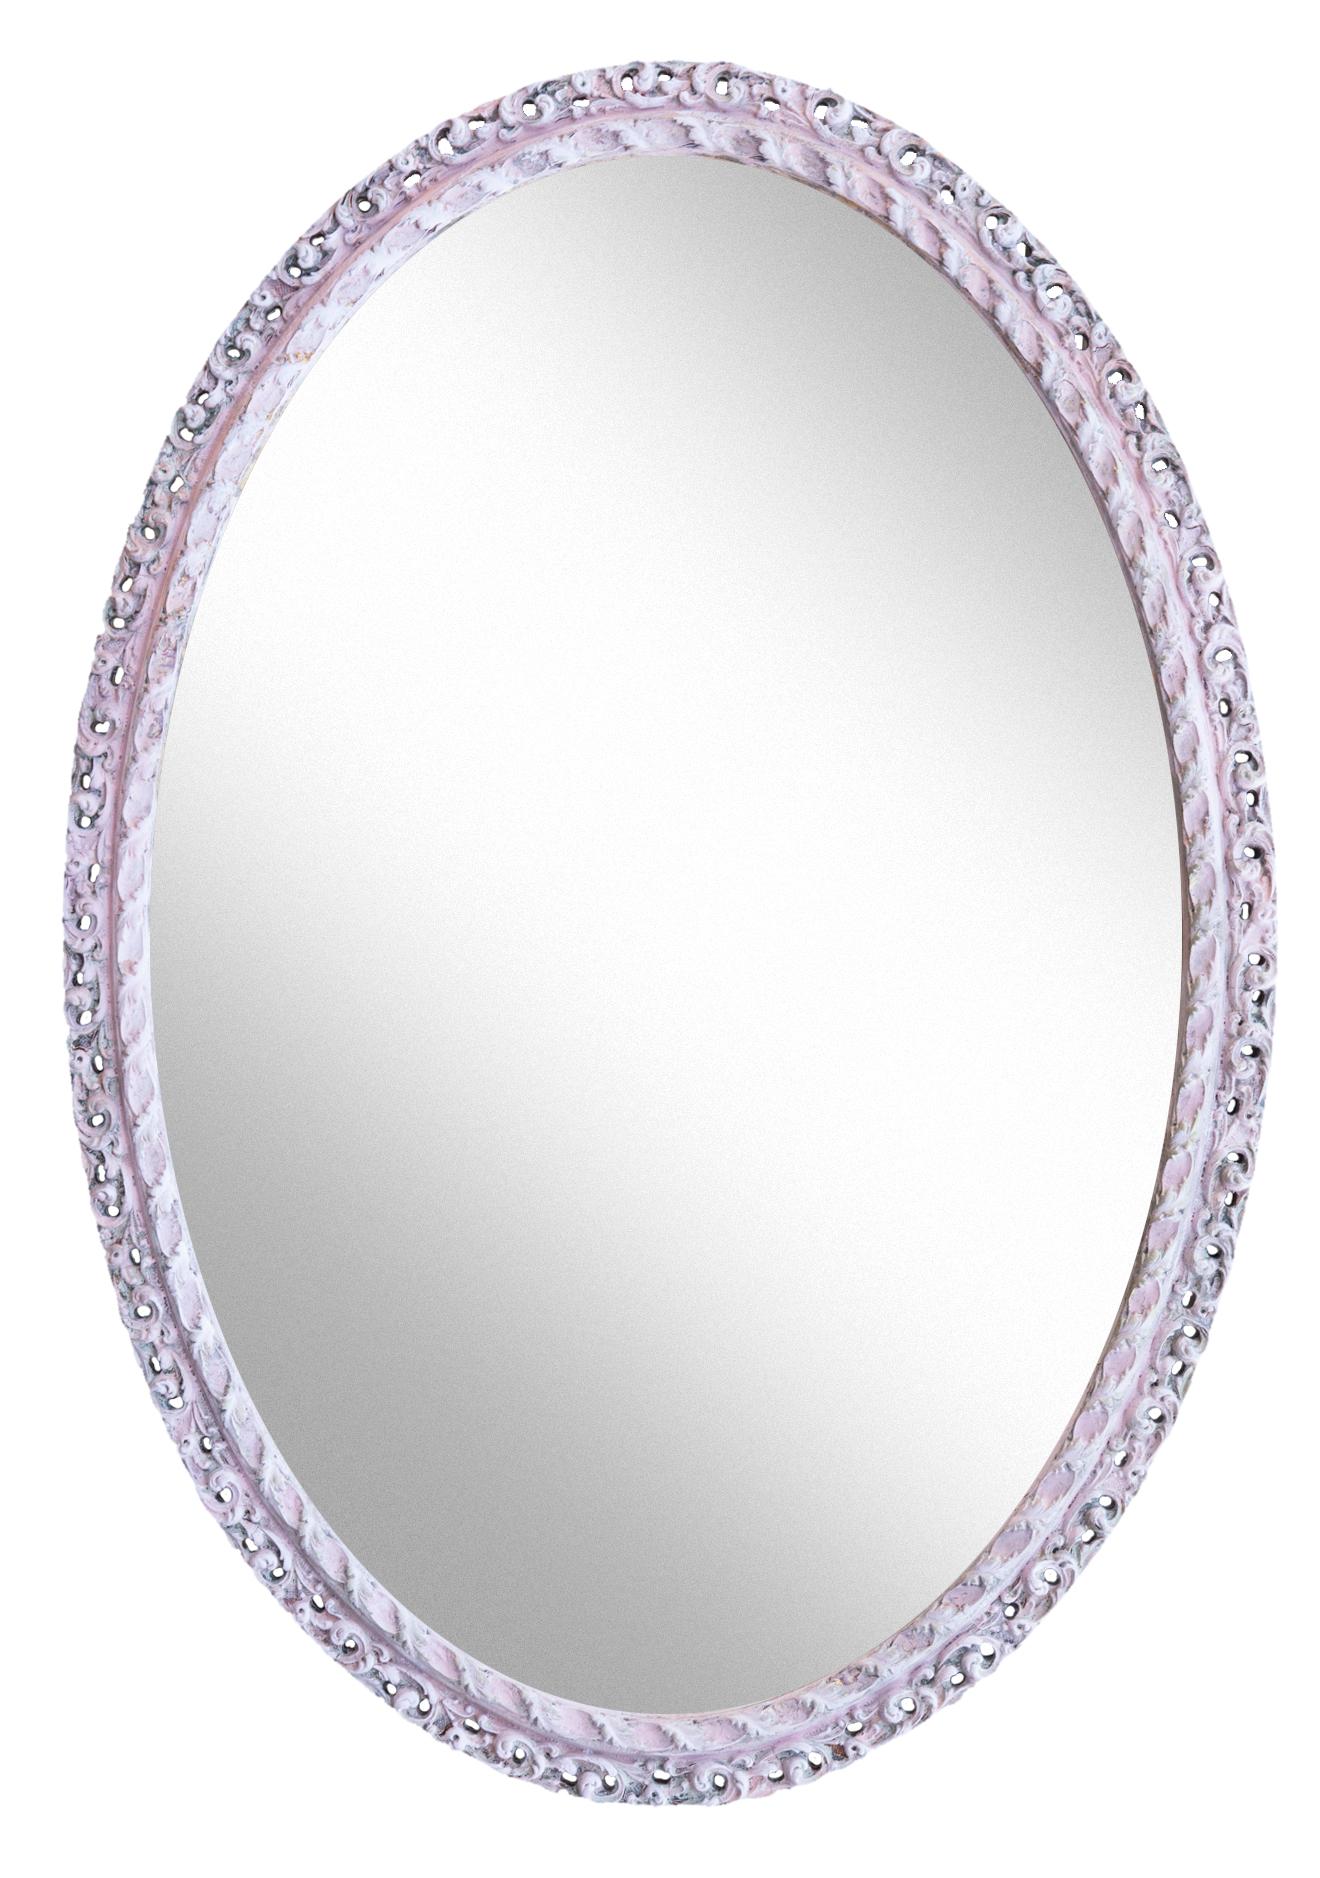 Vintage European oval Hollywood Regency style framed mirror with fretwork throughout.
Original mirror, finished with new backing & wired to hang horizontally or vertically. Circa 1960's, 
A beautiful statement piece for the foyer, master bath or